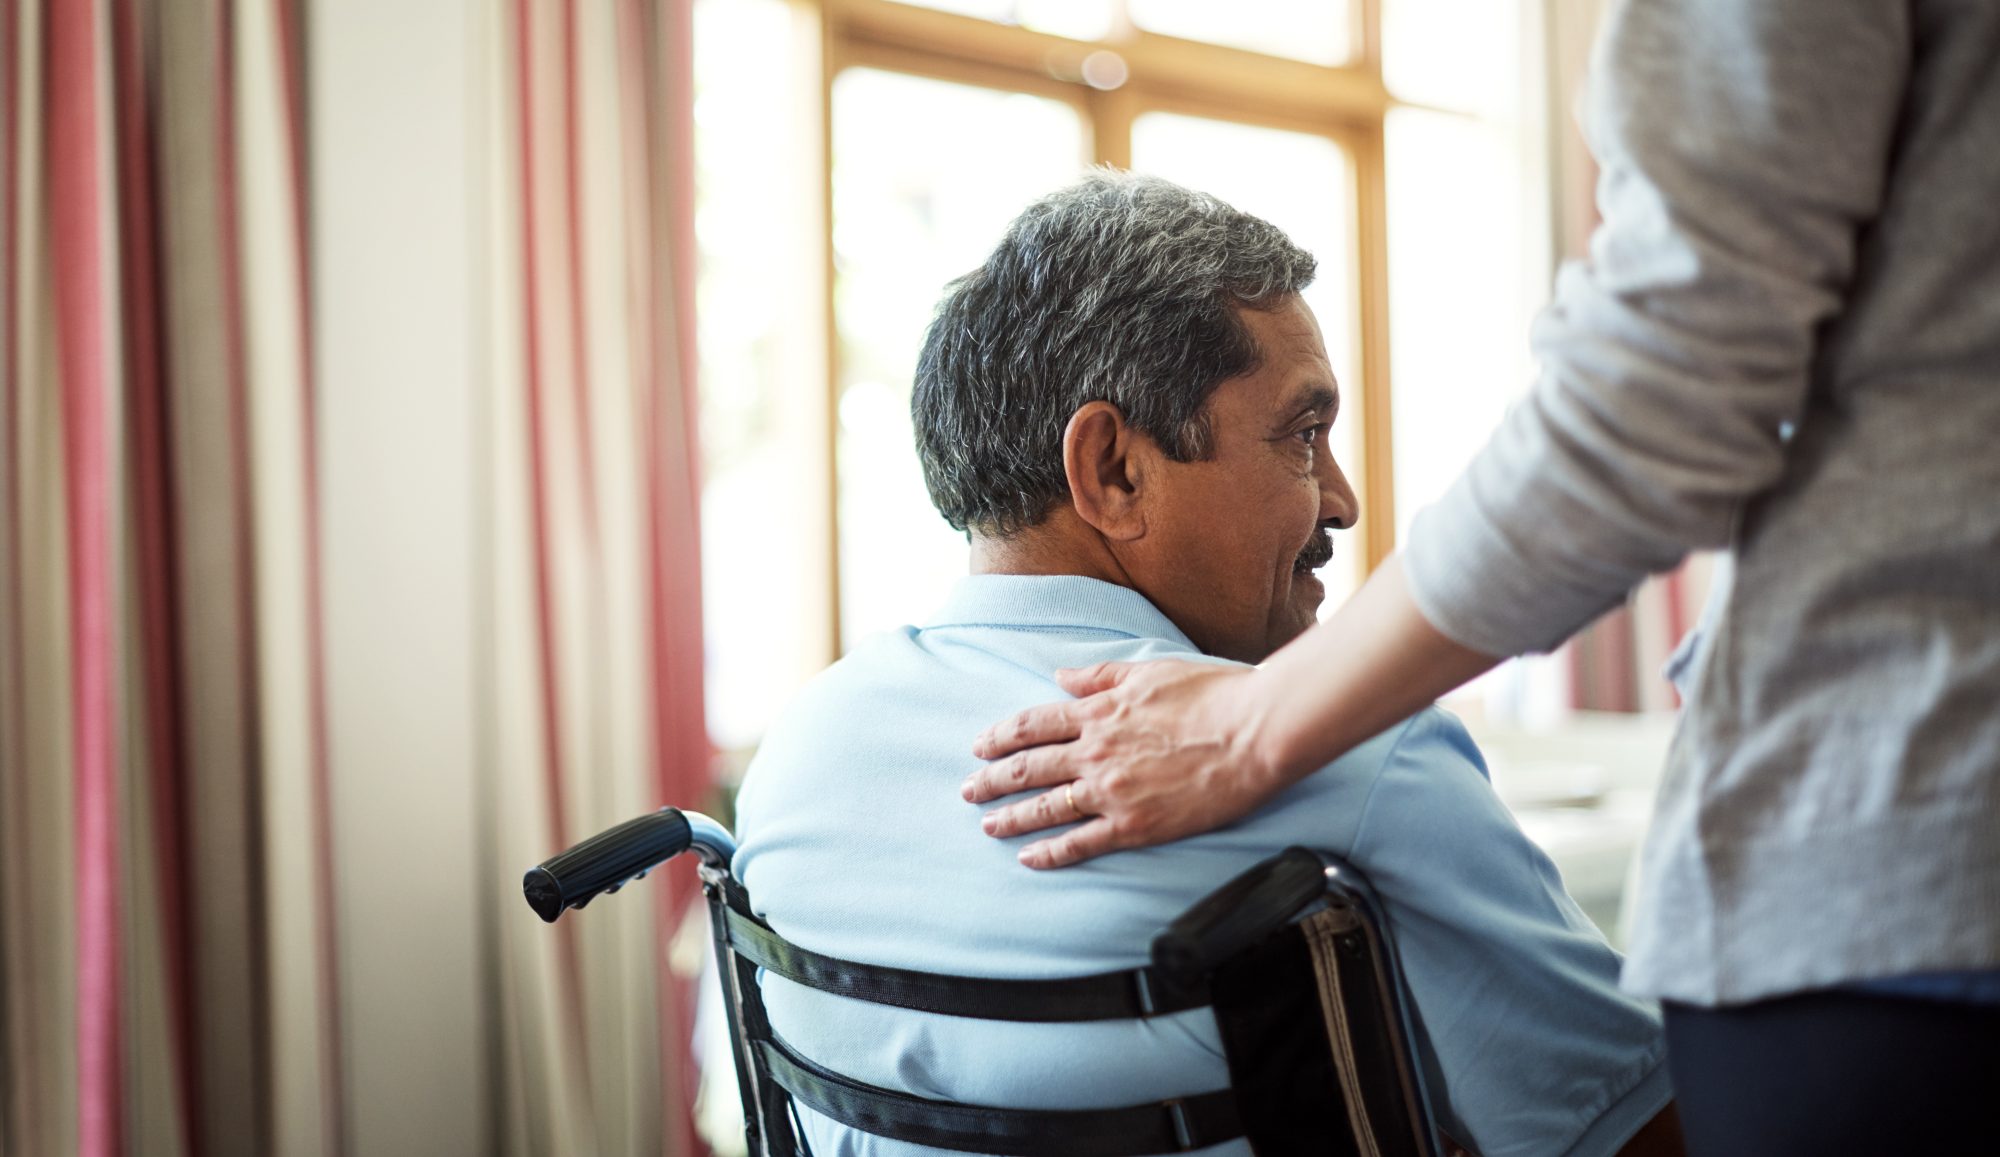 Nurse caring for a senior man in a retirement home